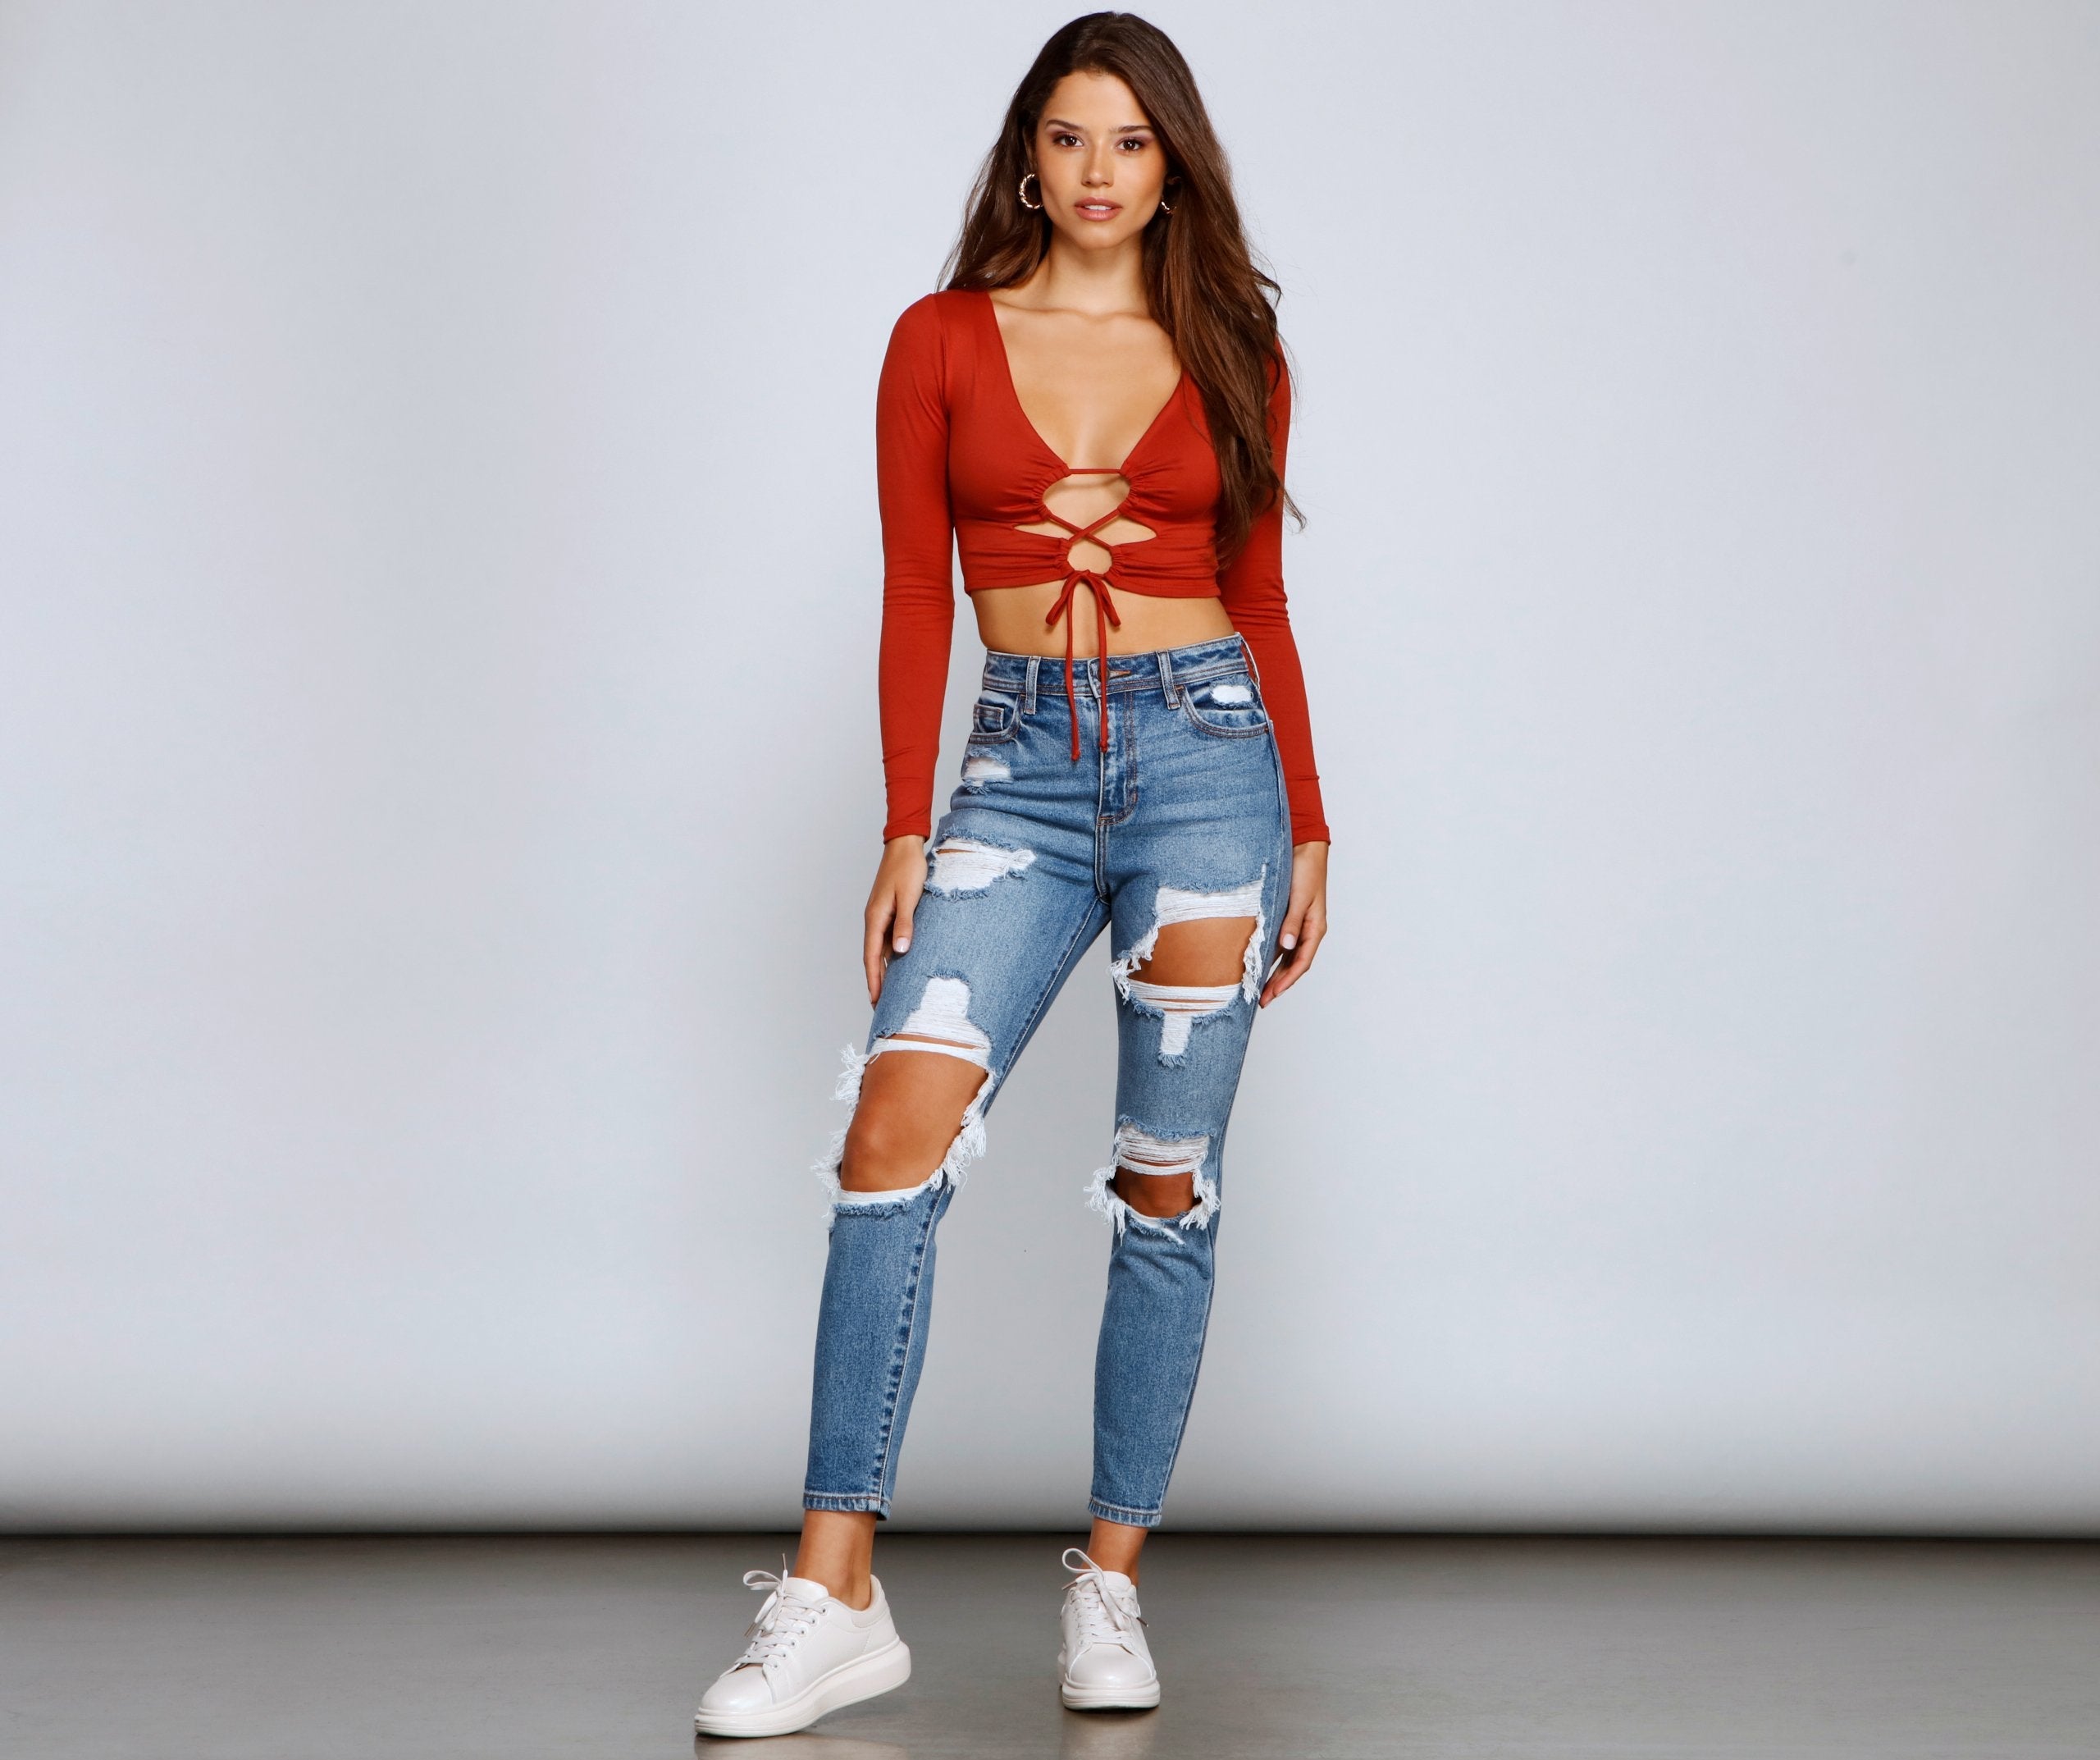 Taking The Plunge Lace-Up Crop Top - Lady Occasions